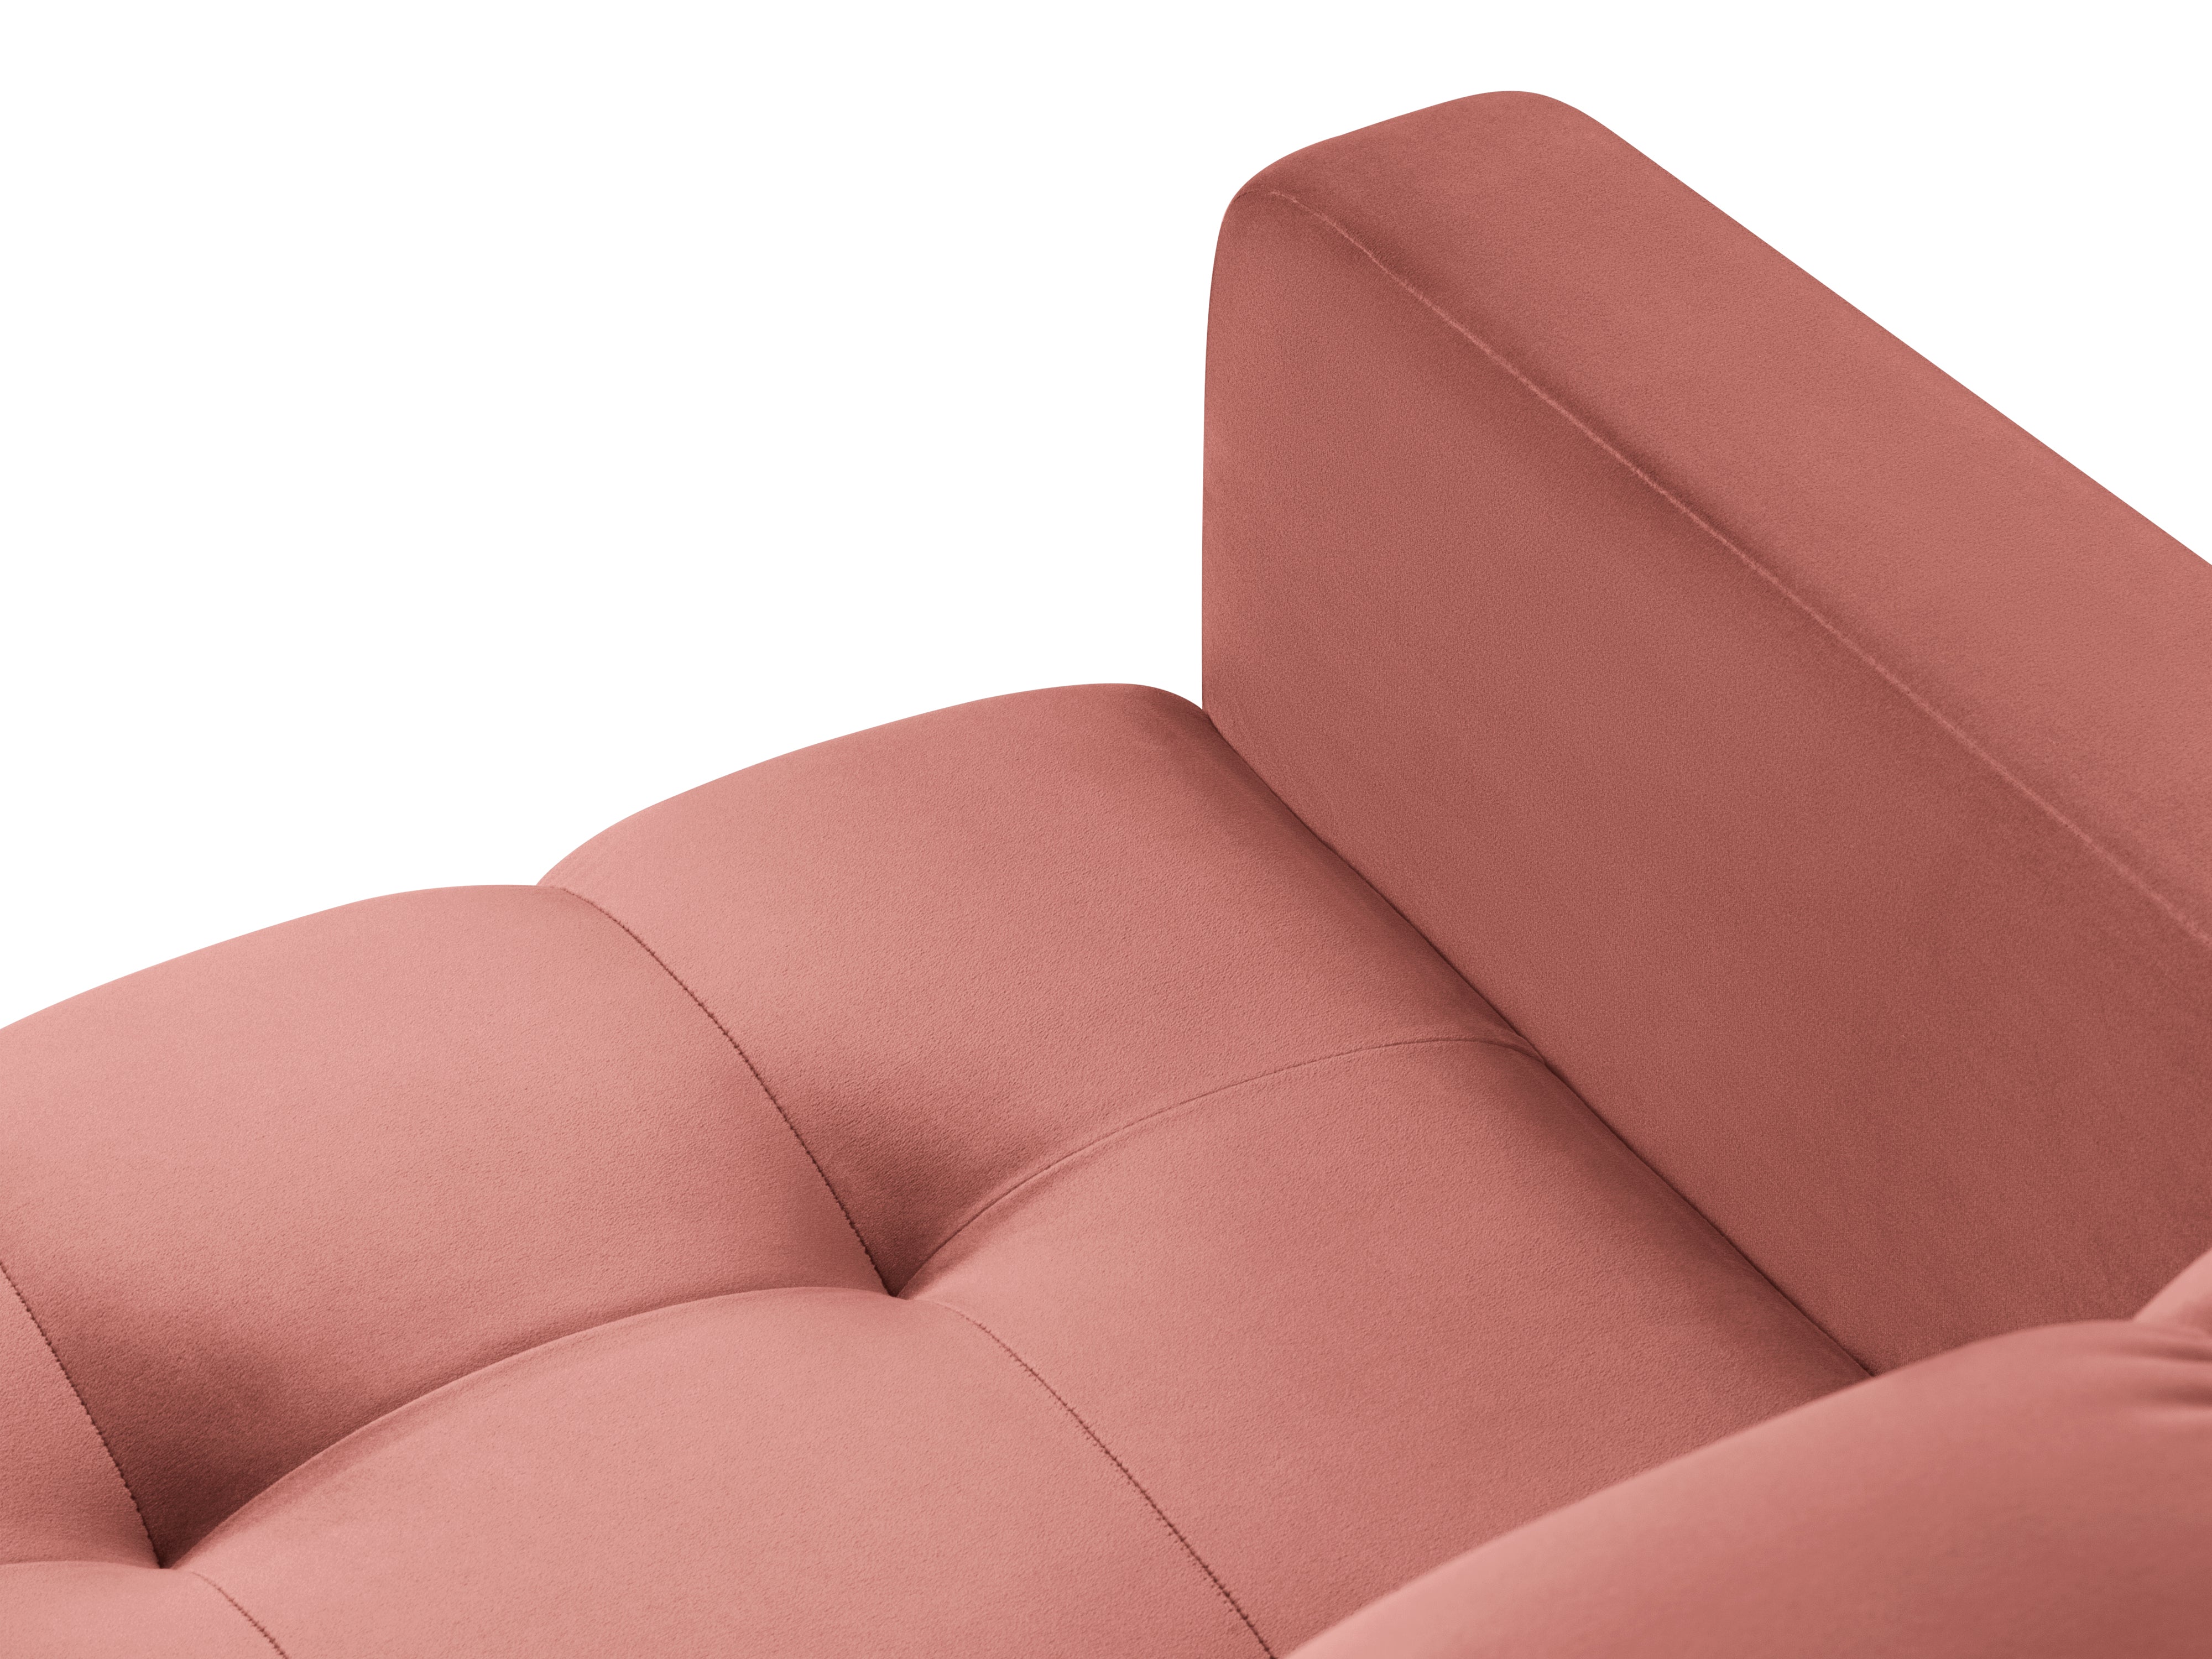 Armchair velvet BALI pink with gold base